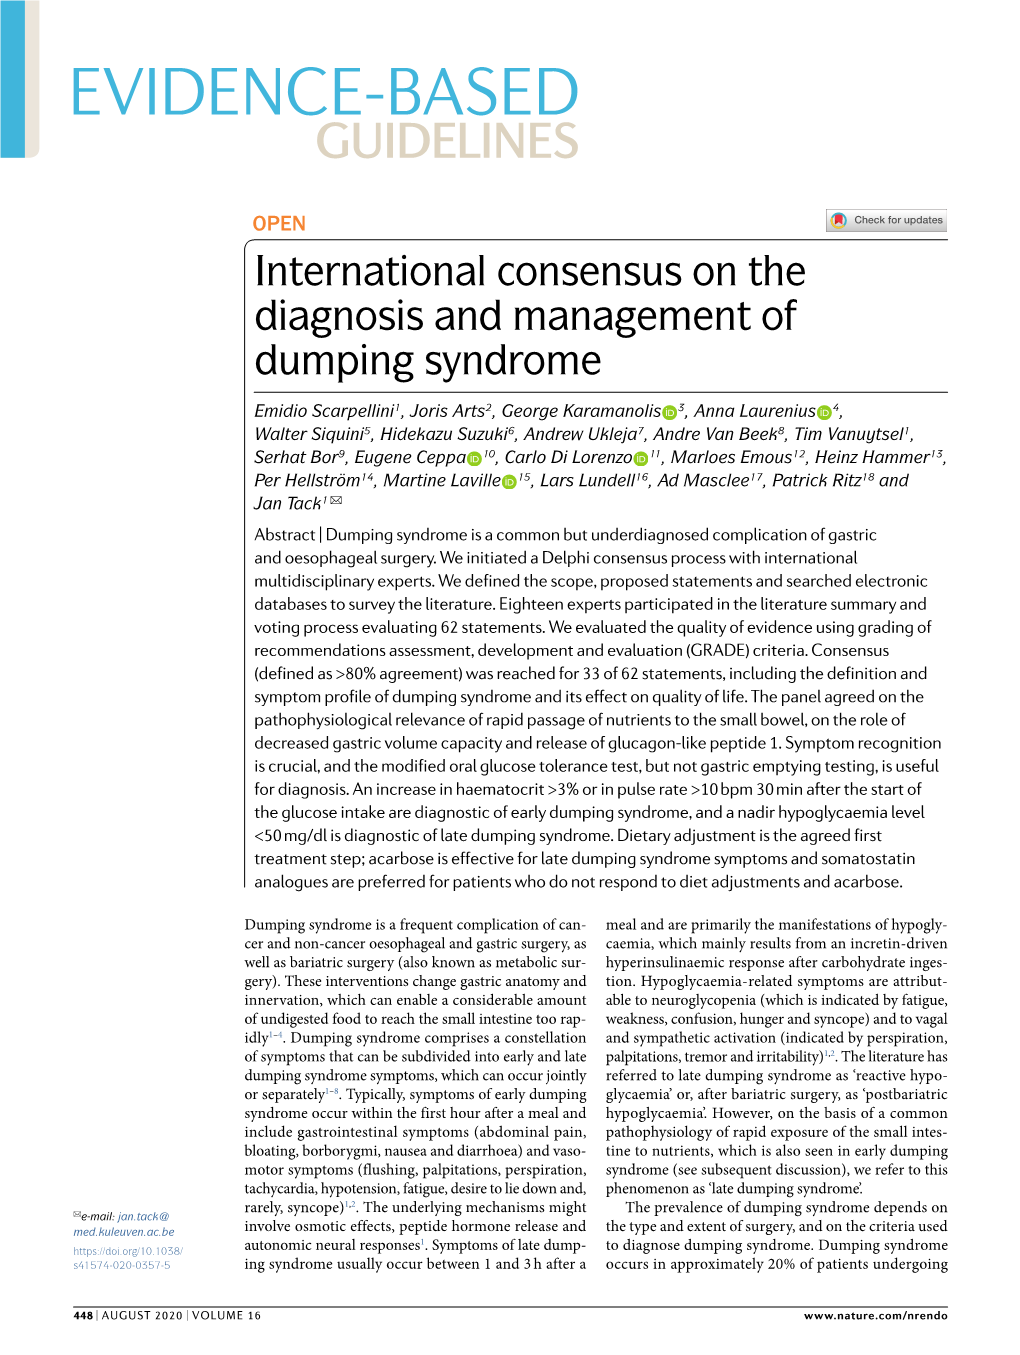 International Consensus on the Diagnosis and Management of Dumping Syndrome